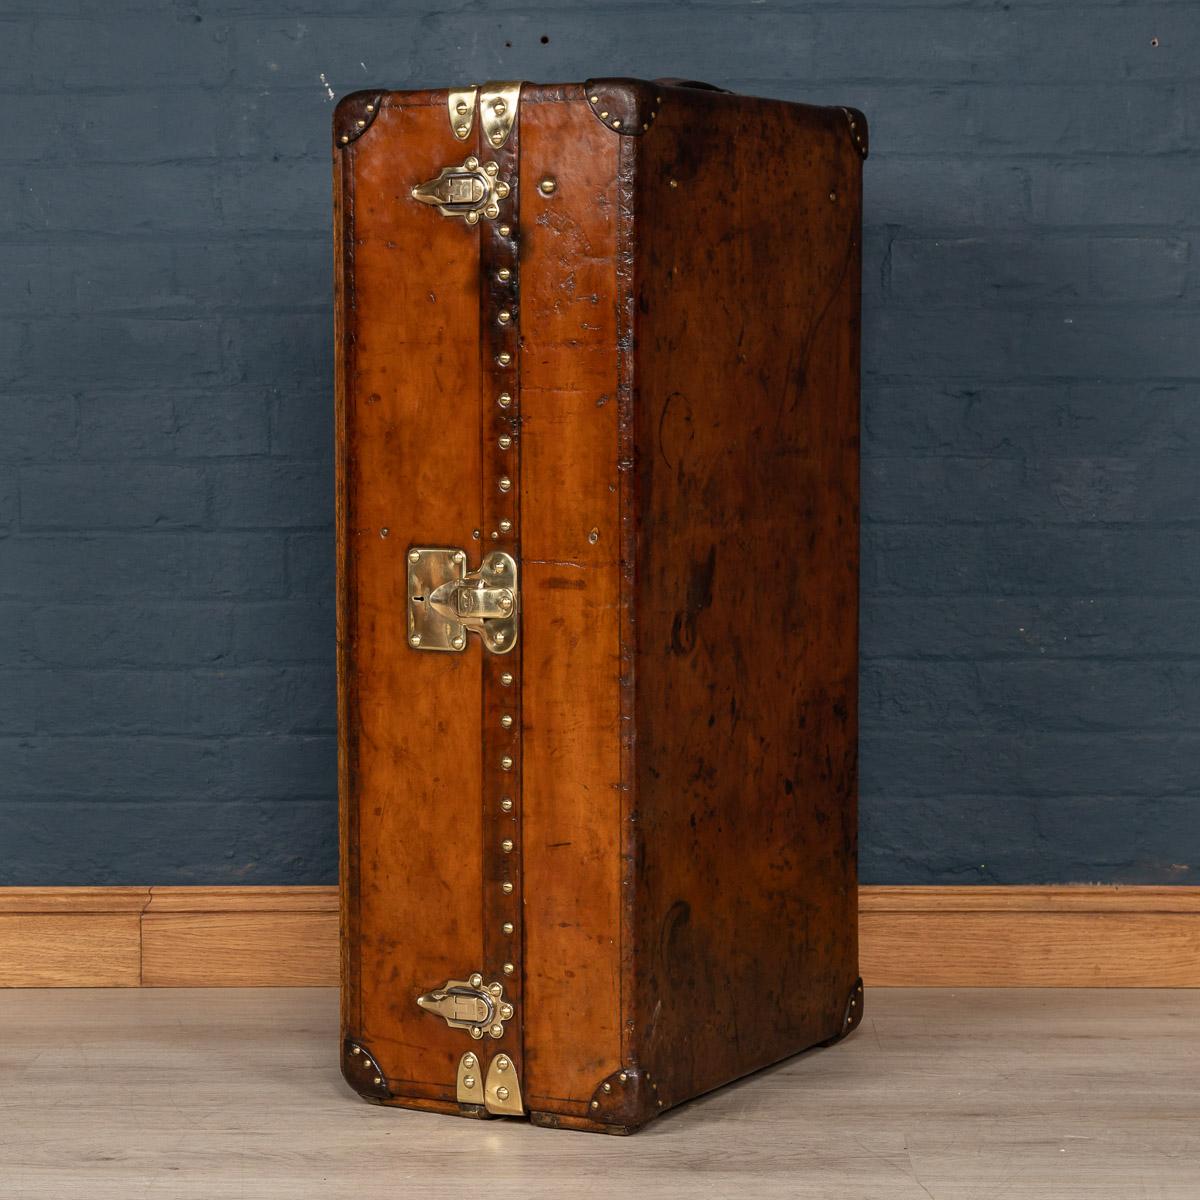 One of the most popular and sought after Louis Vuitton trunks, a wardrobe trunk finished in cowhide leather, dating to the early part of the 20th century. These coverings were custom orders with Louis Vuitton, made from a single sheet of the finest